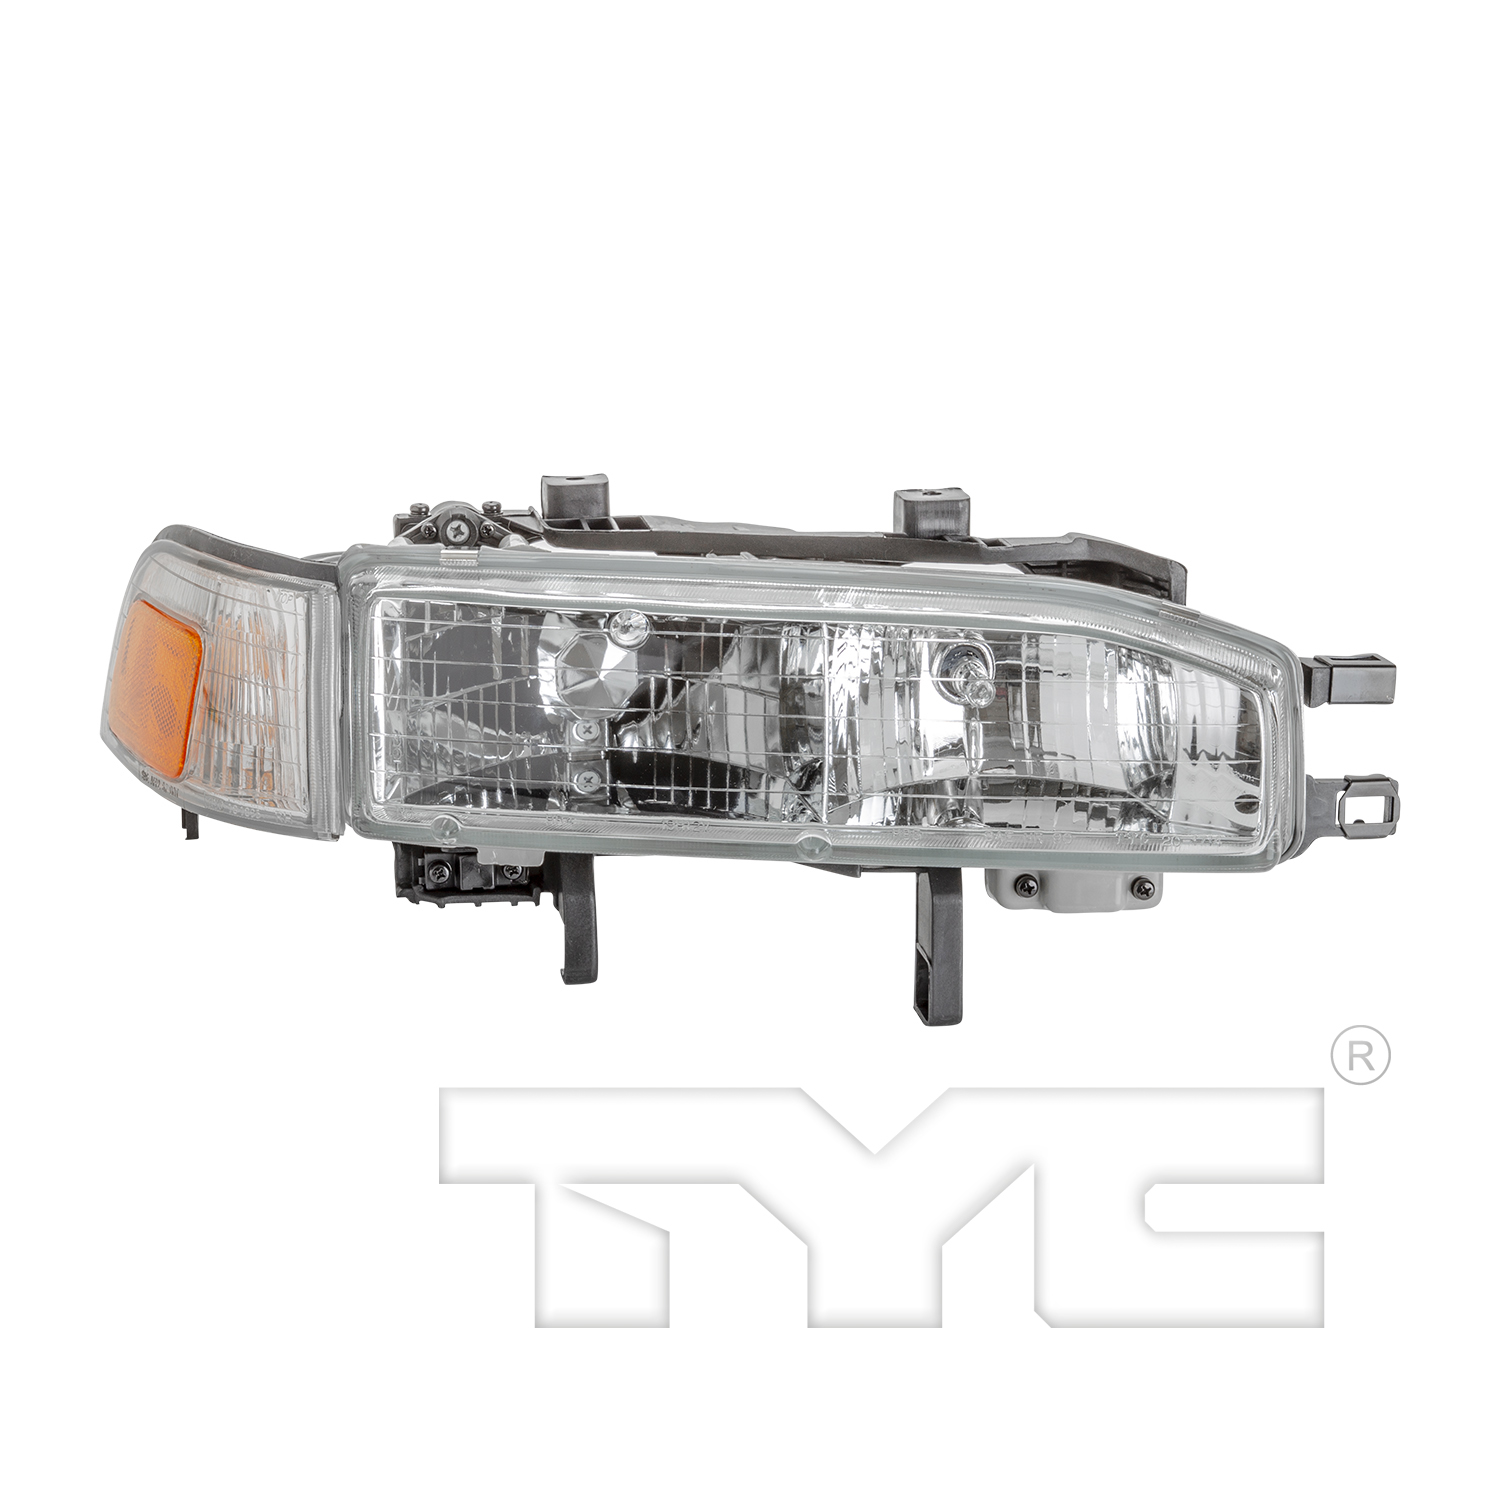 Aftermarket HEADLIGHTS for HONDA - ACCORD, ACCORD,90-91,RT Headlamp assy composite